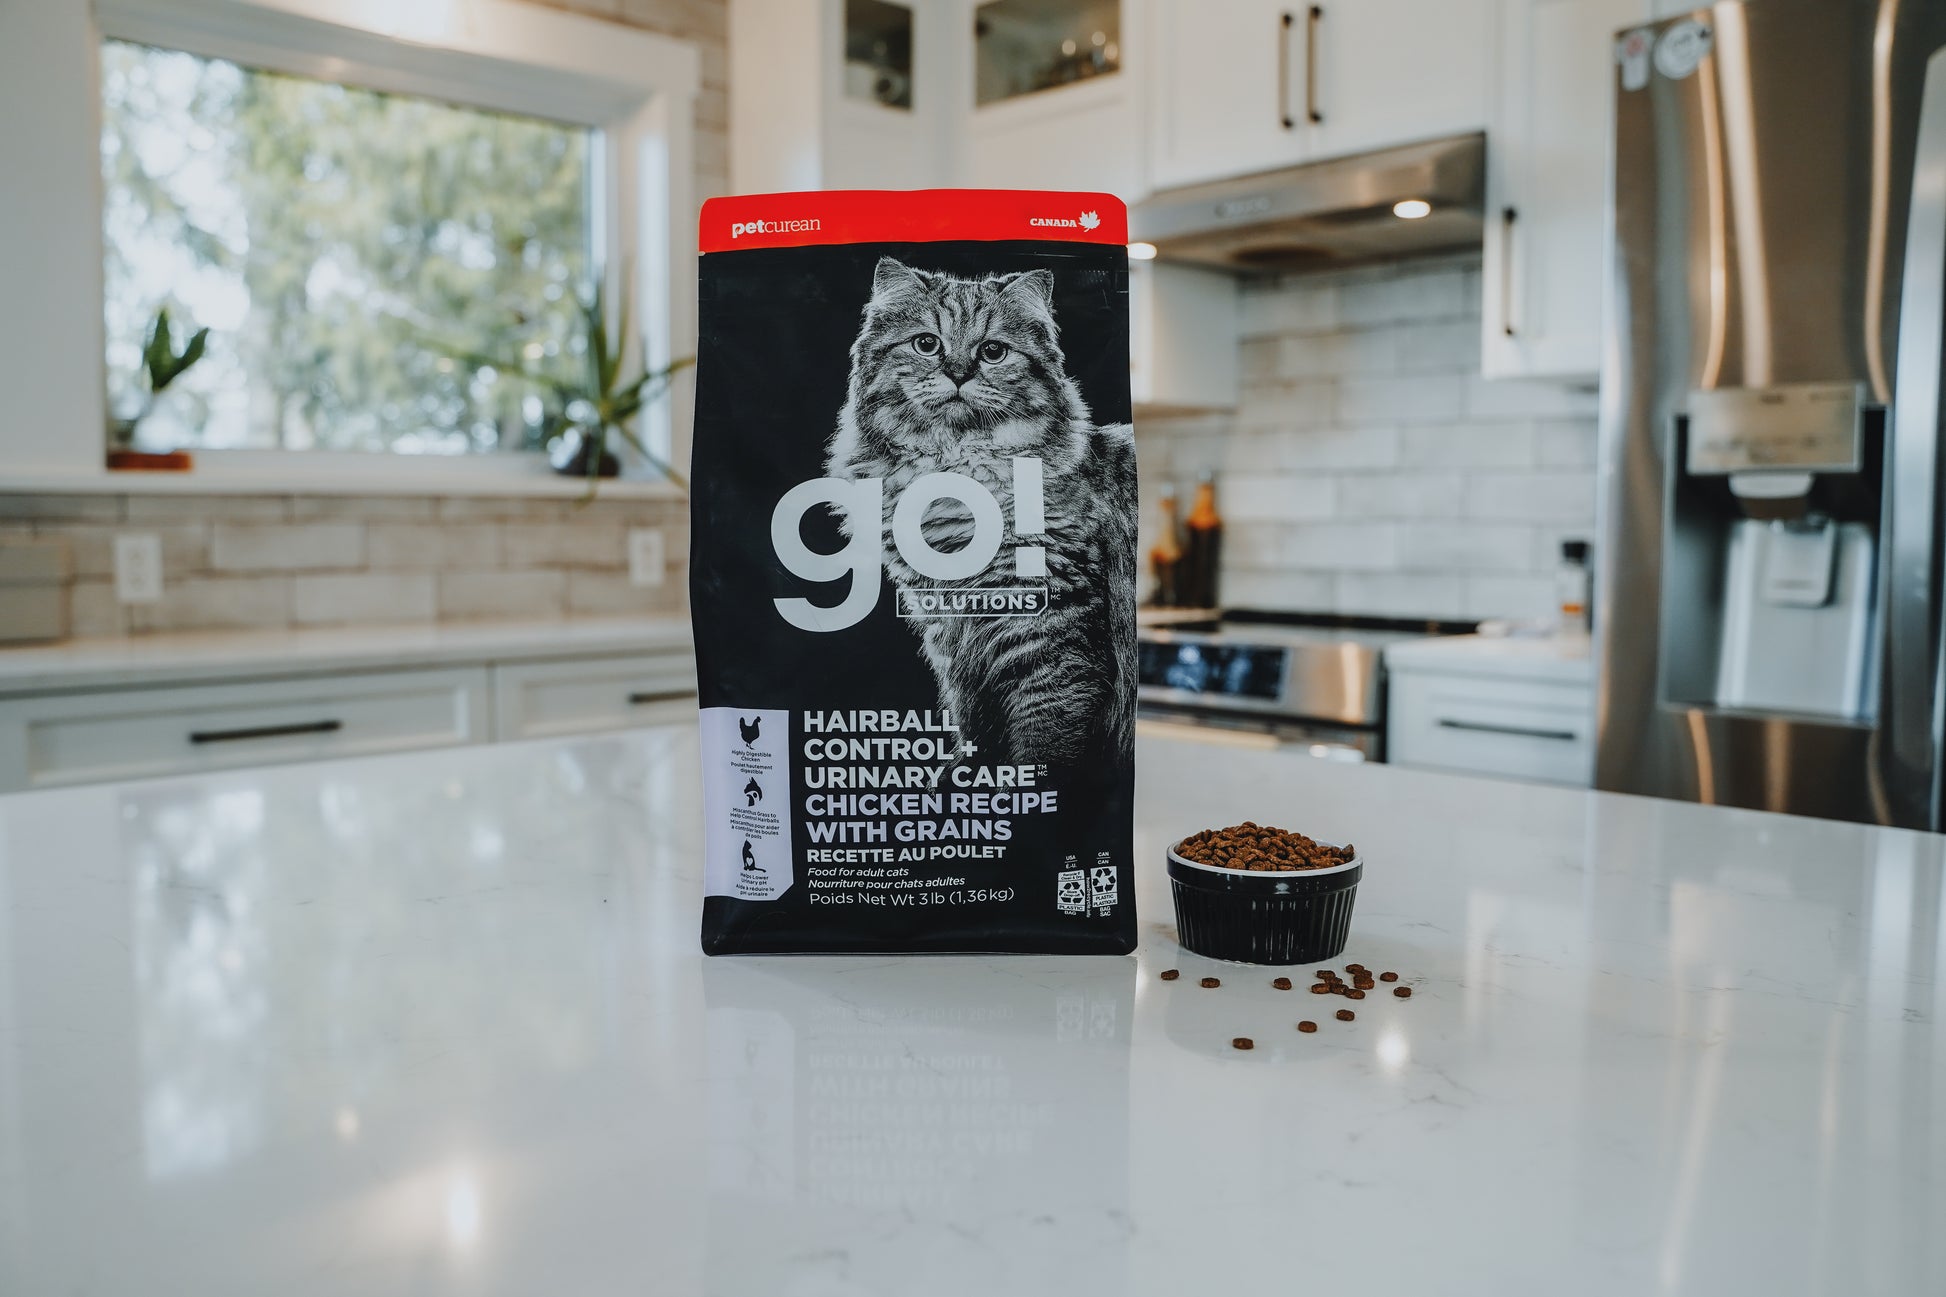 Go! Solutions Hairball & Urinary Care Chicken Recipe With Grains For Cats  Cat Food  | PetMax Canada